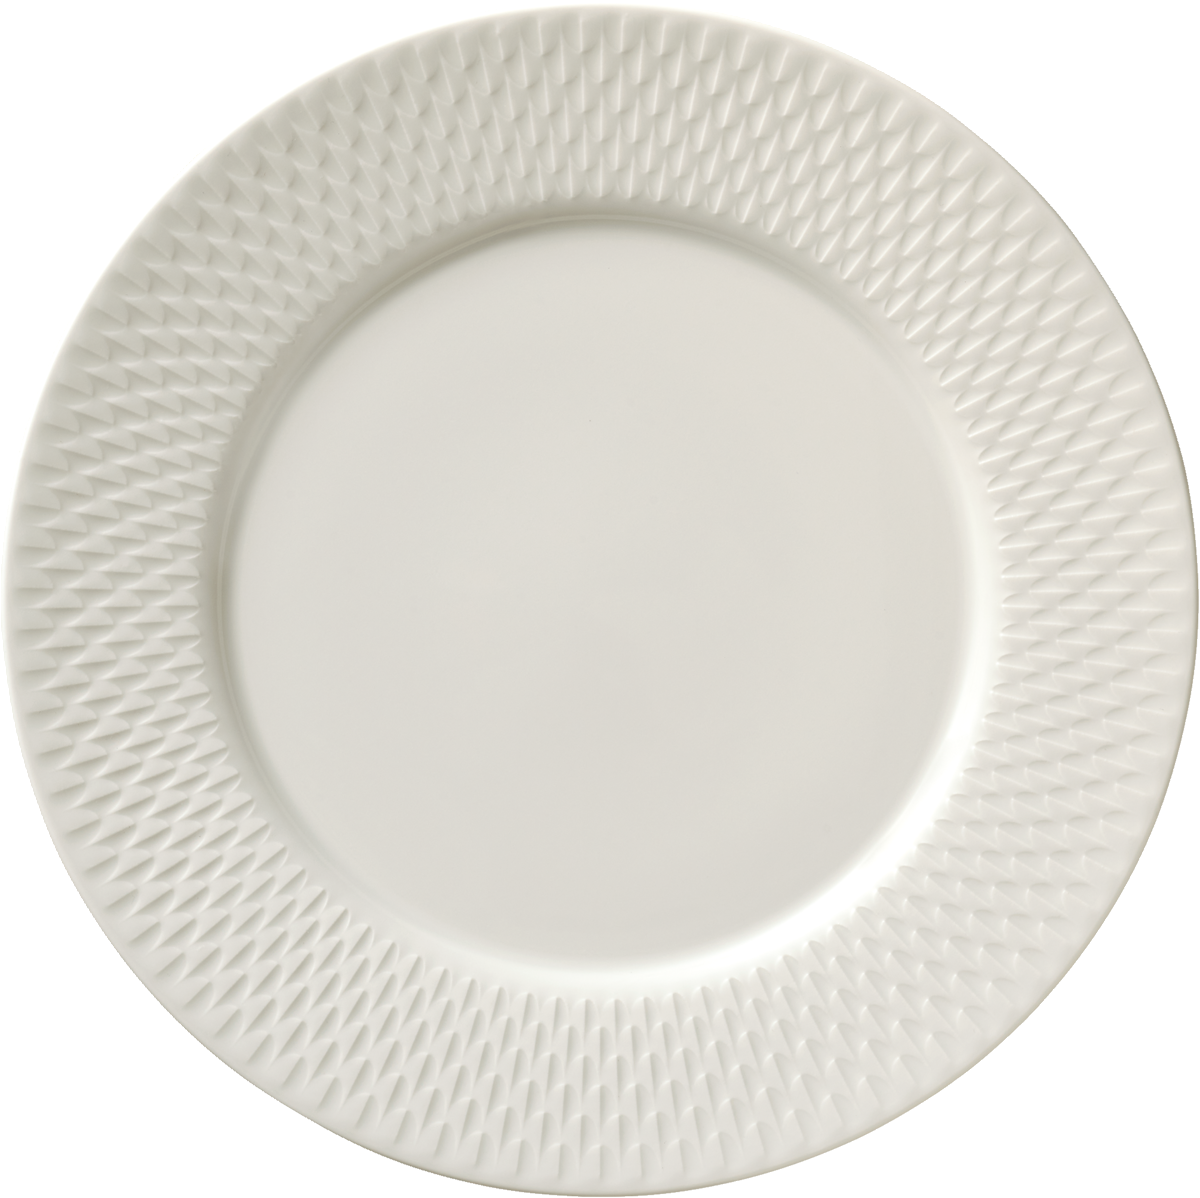 Plate flat round with rim embossed 17cm